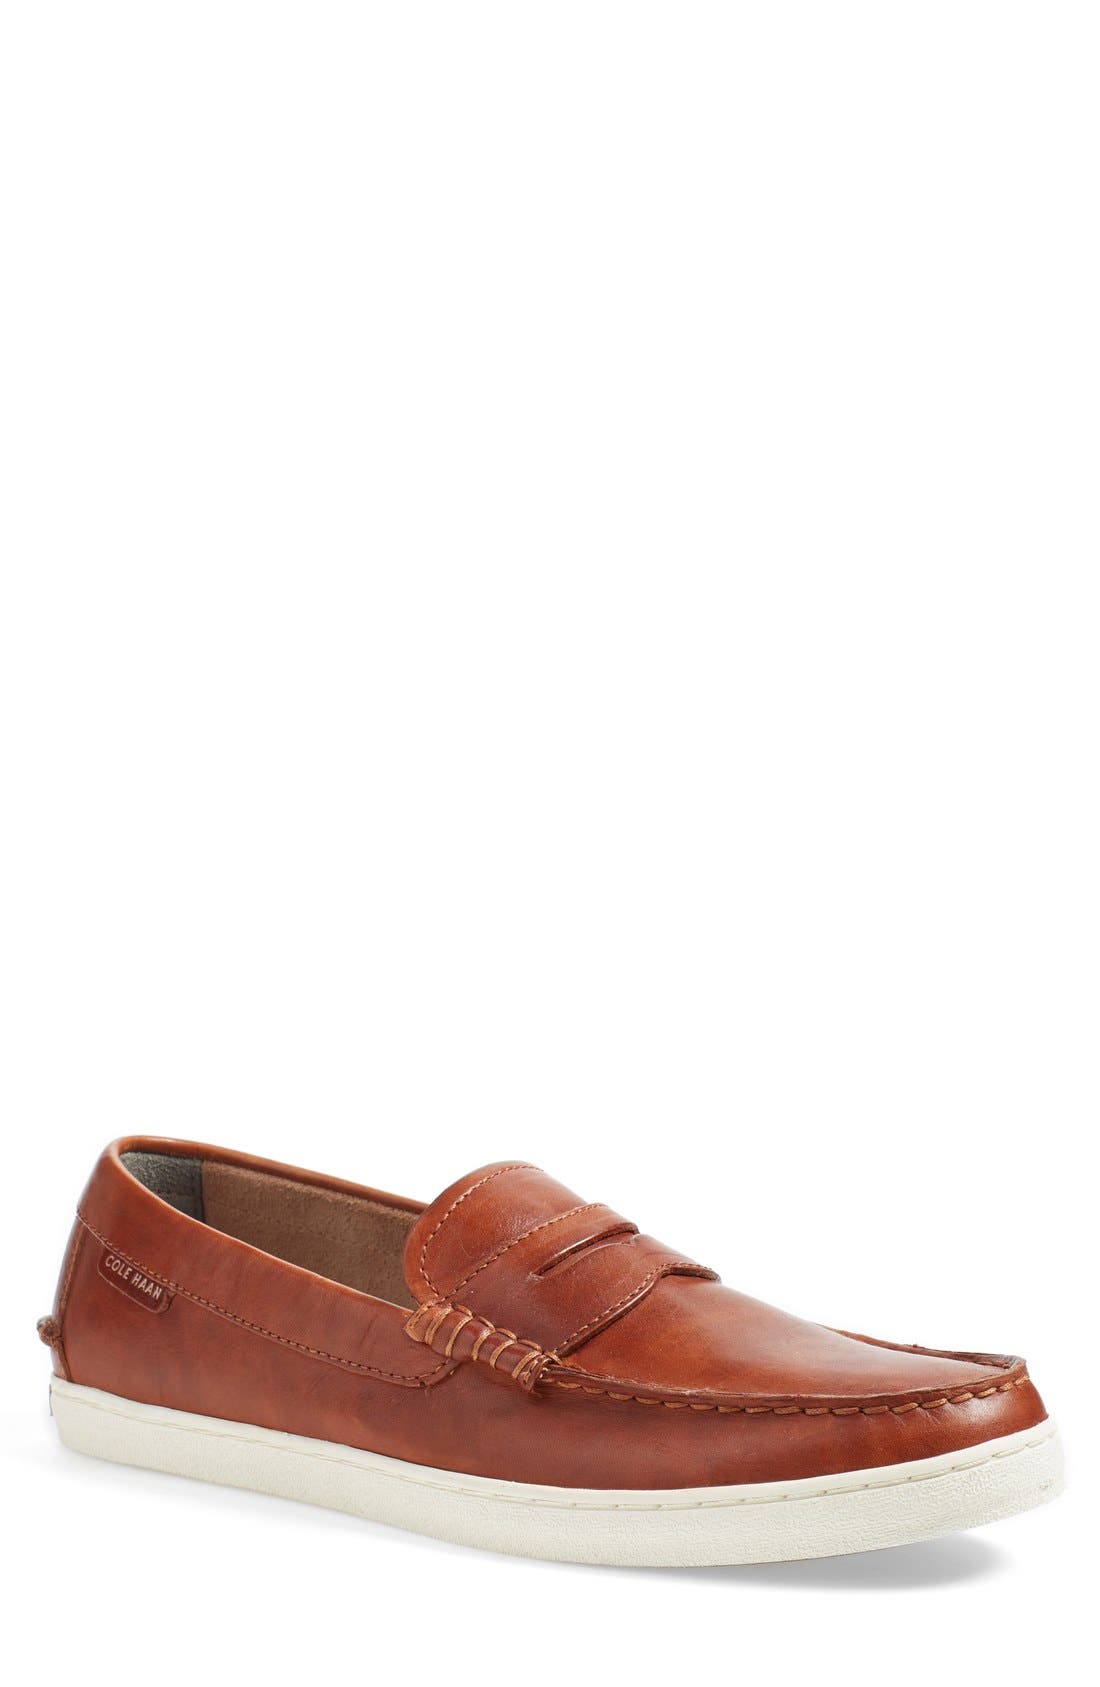 pinch penny loafer